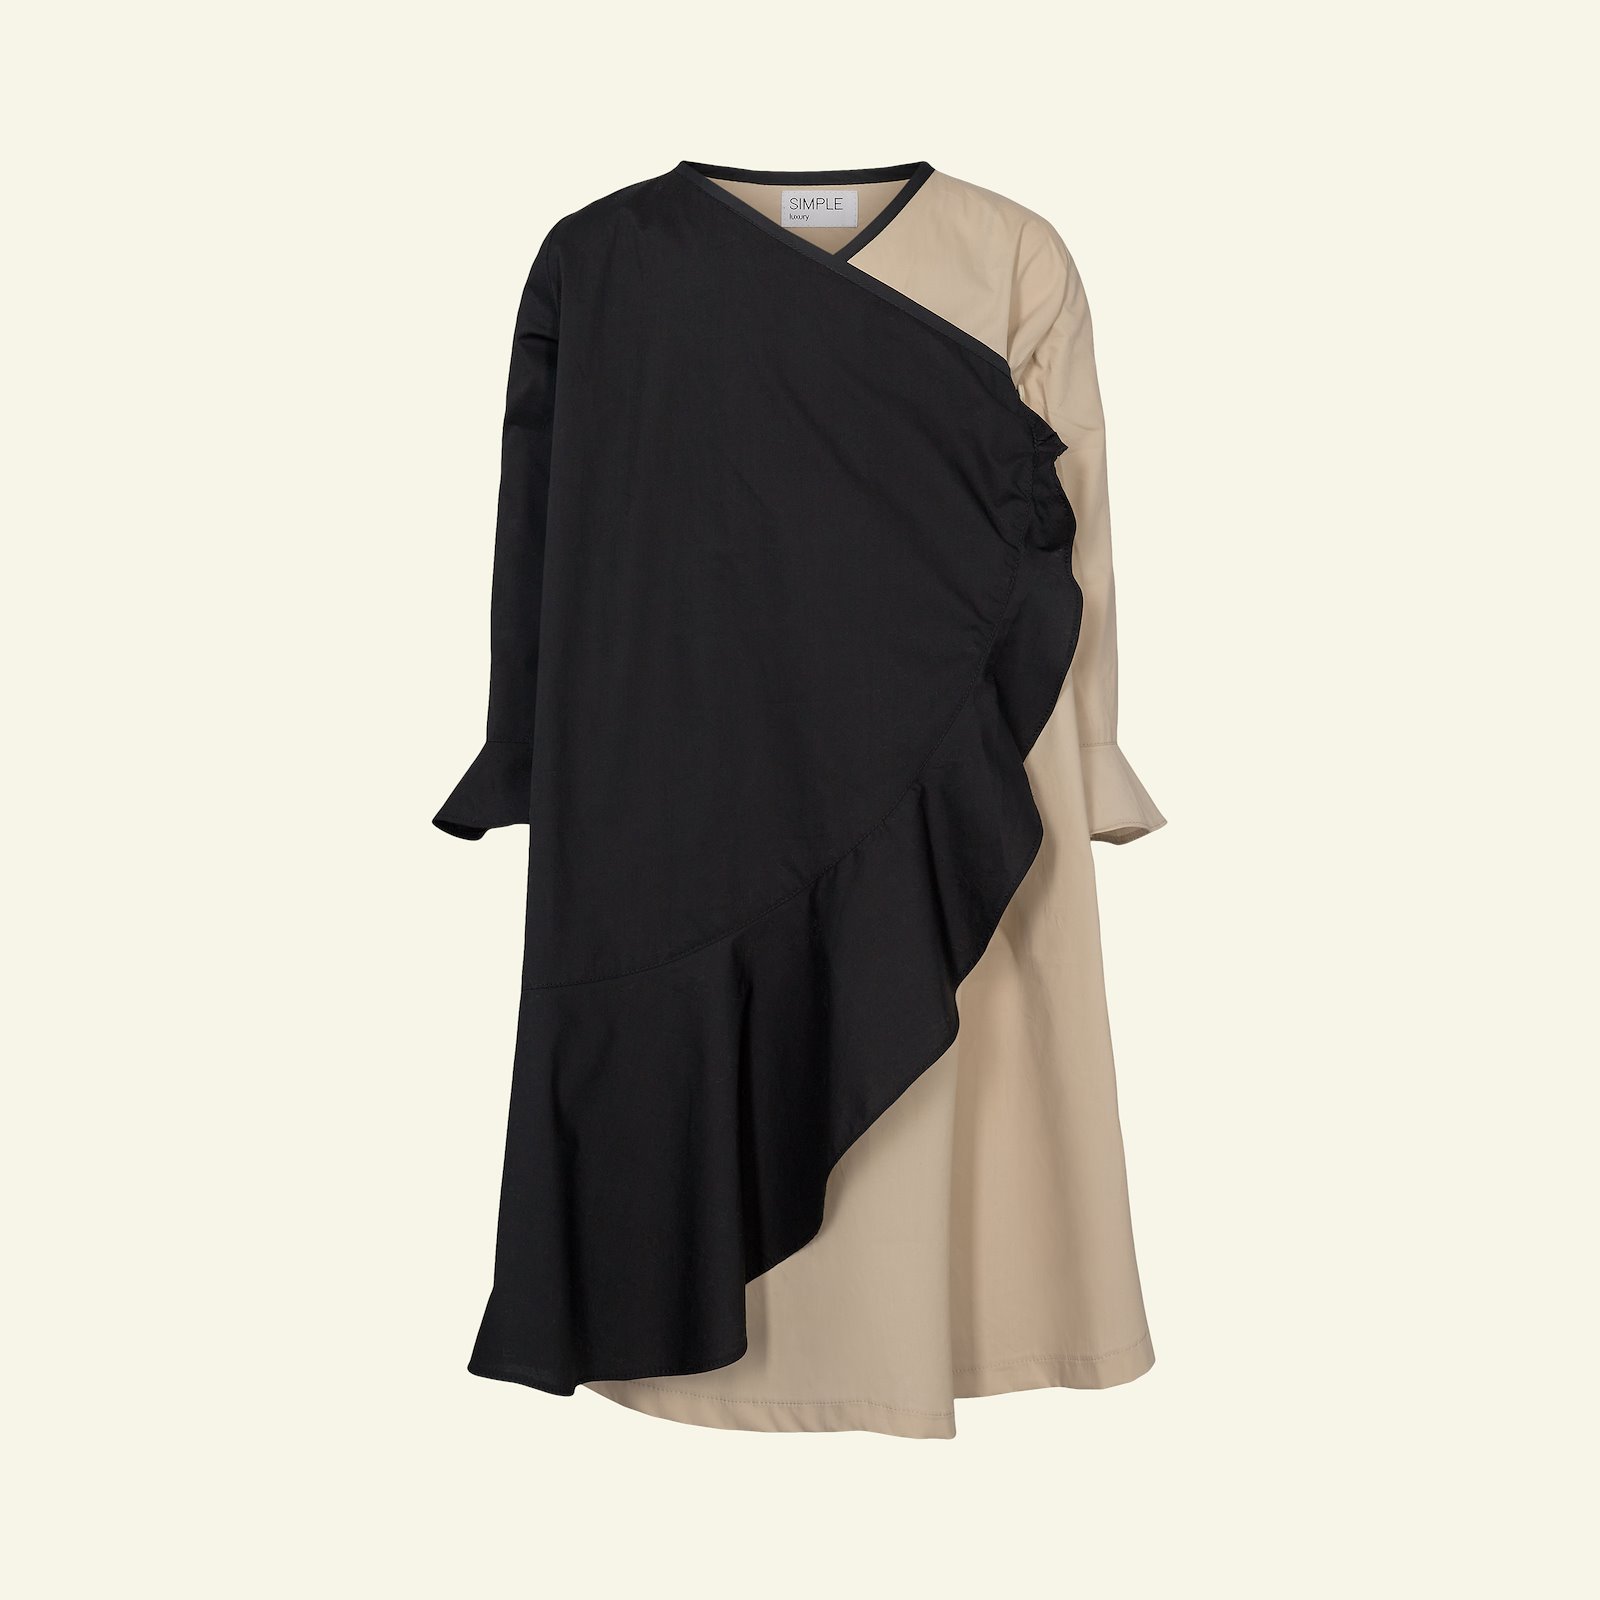 Dress und blouse with flounce, 122/7y p63066_540110_510112_64080_24865_sskit